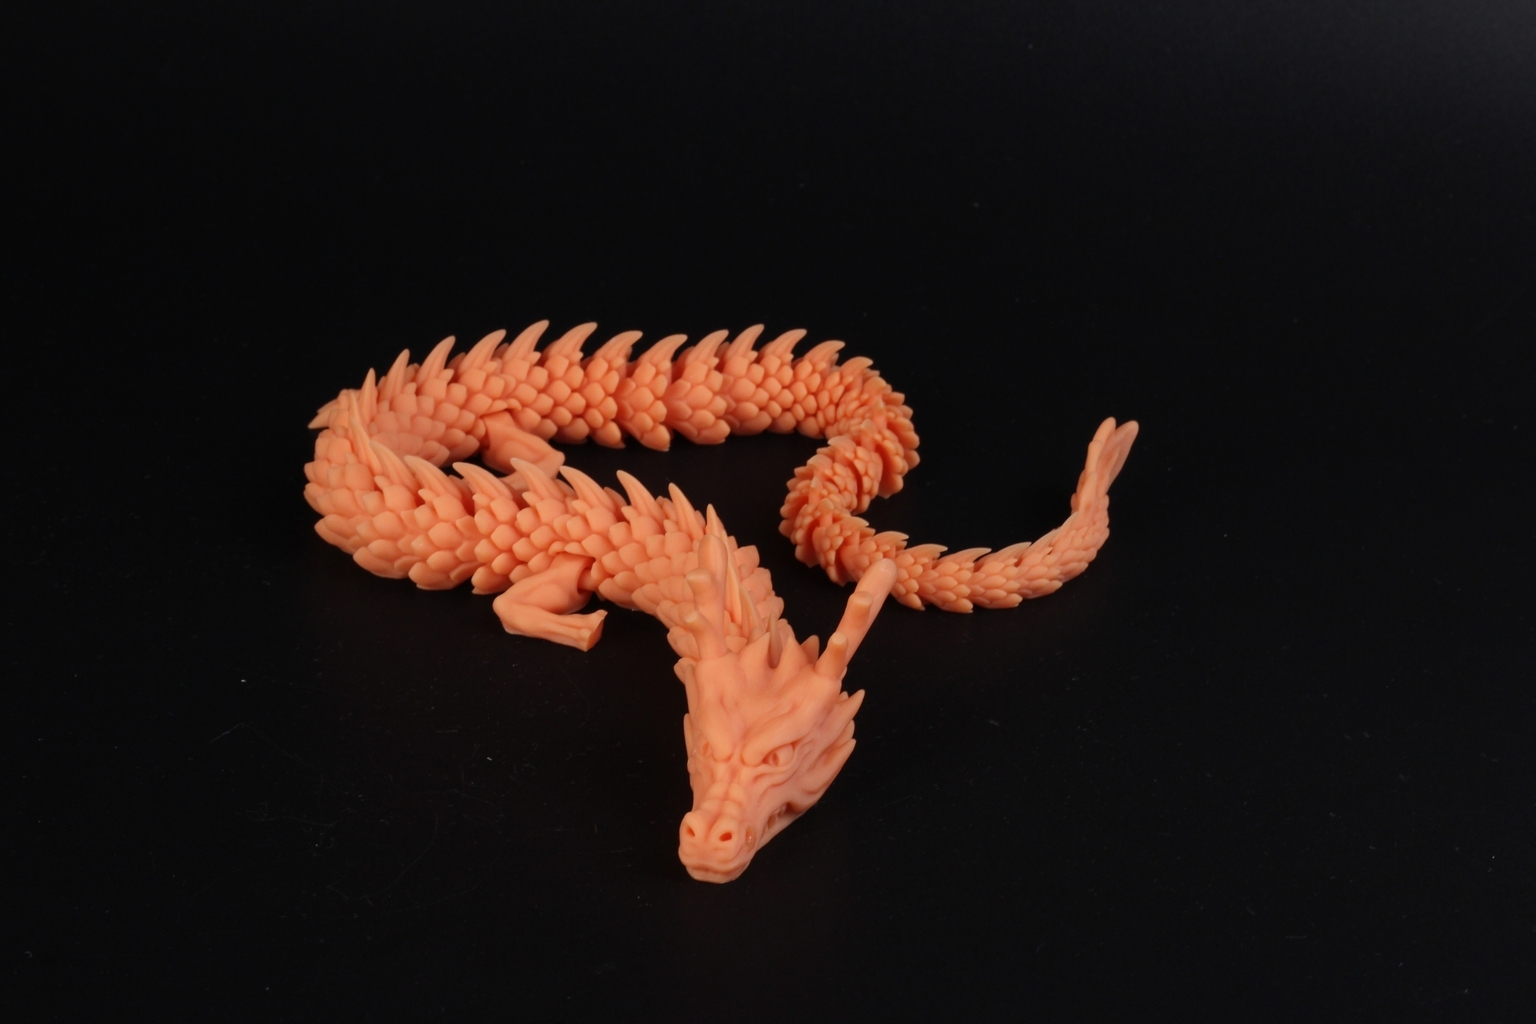 Flexi Dragon printed on Anycubic M3 | Anycubic Photon M3 Max Review: Who Needs FDM Anymore?